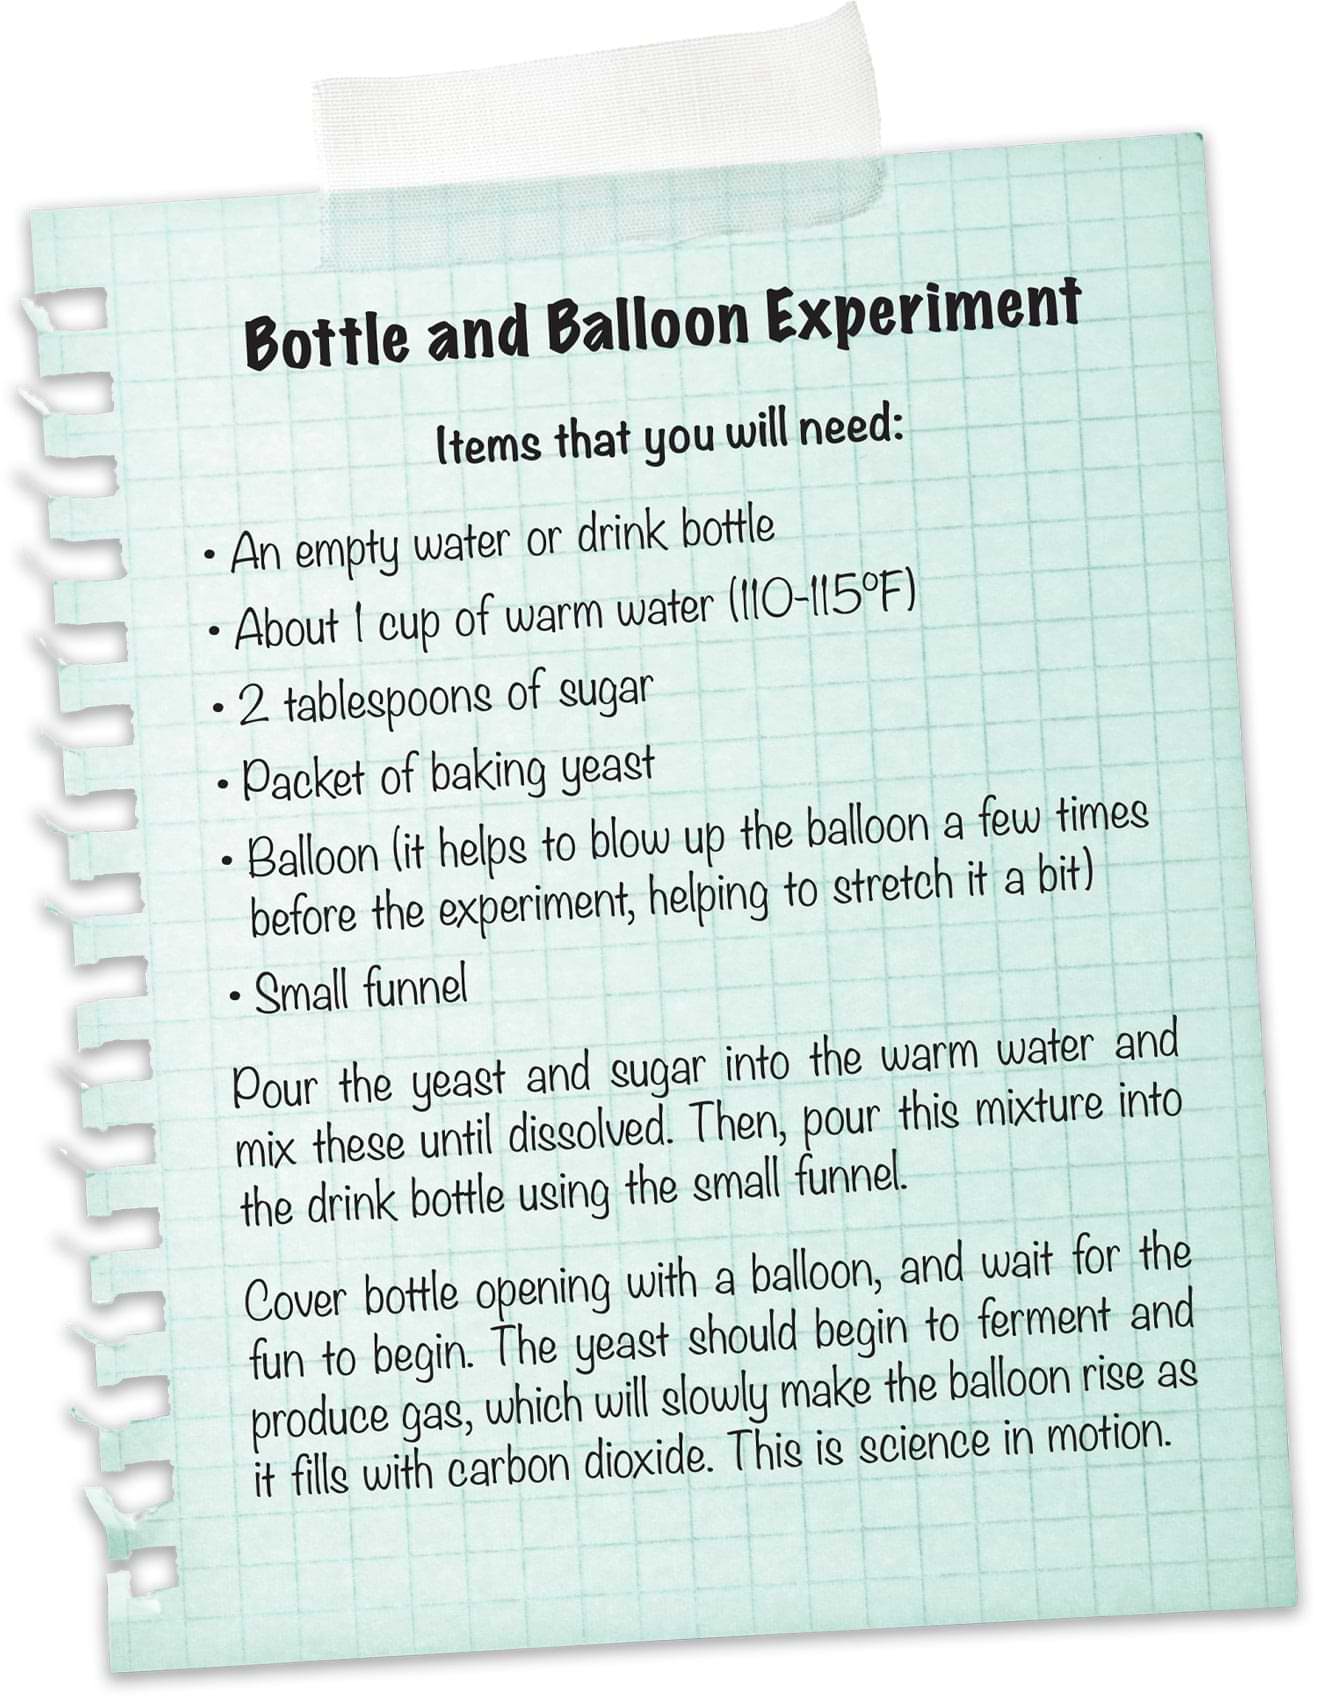 Bottle and Balloon Experiment list and directions